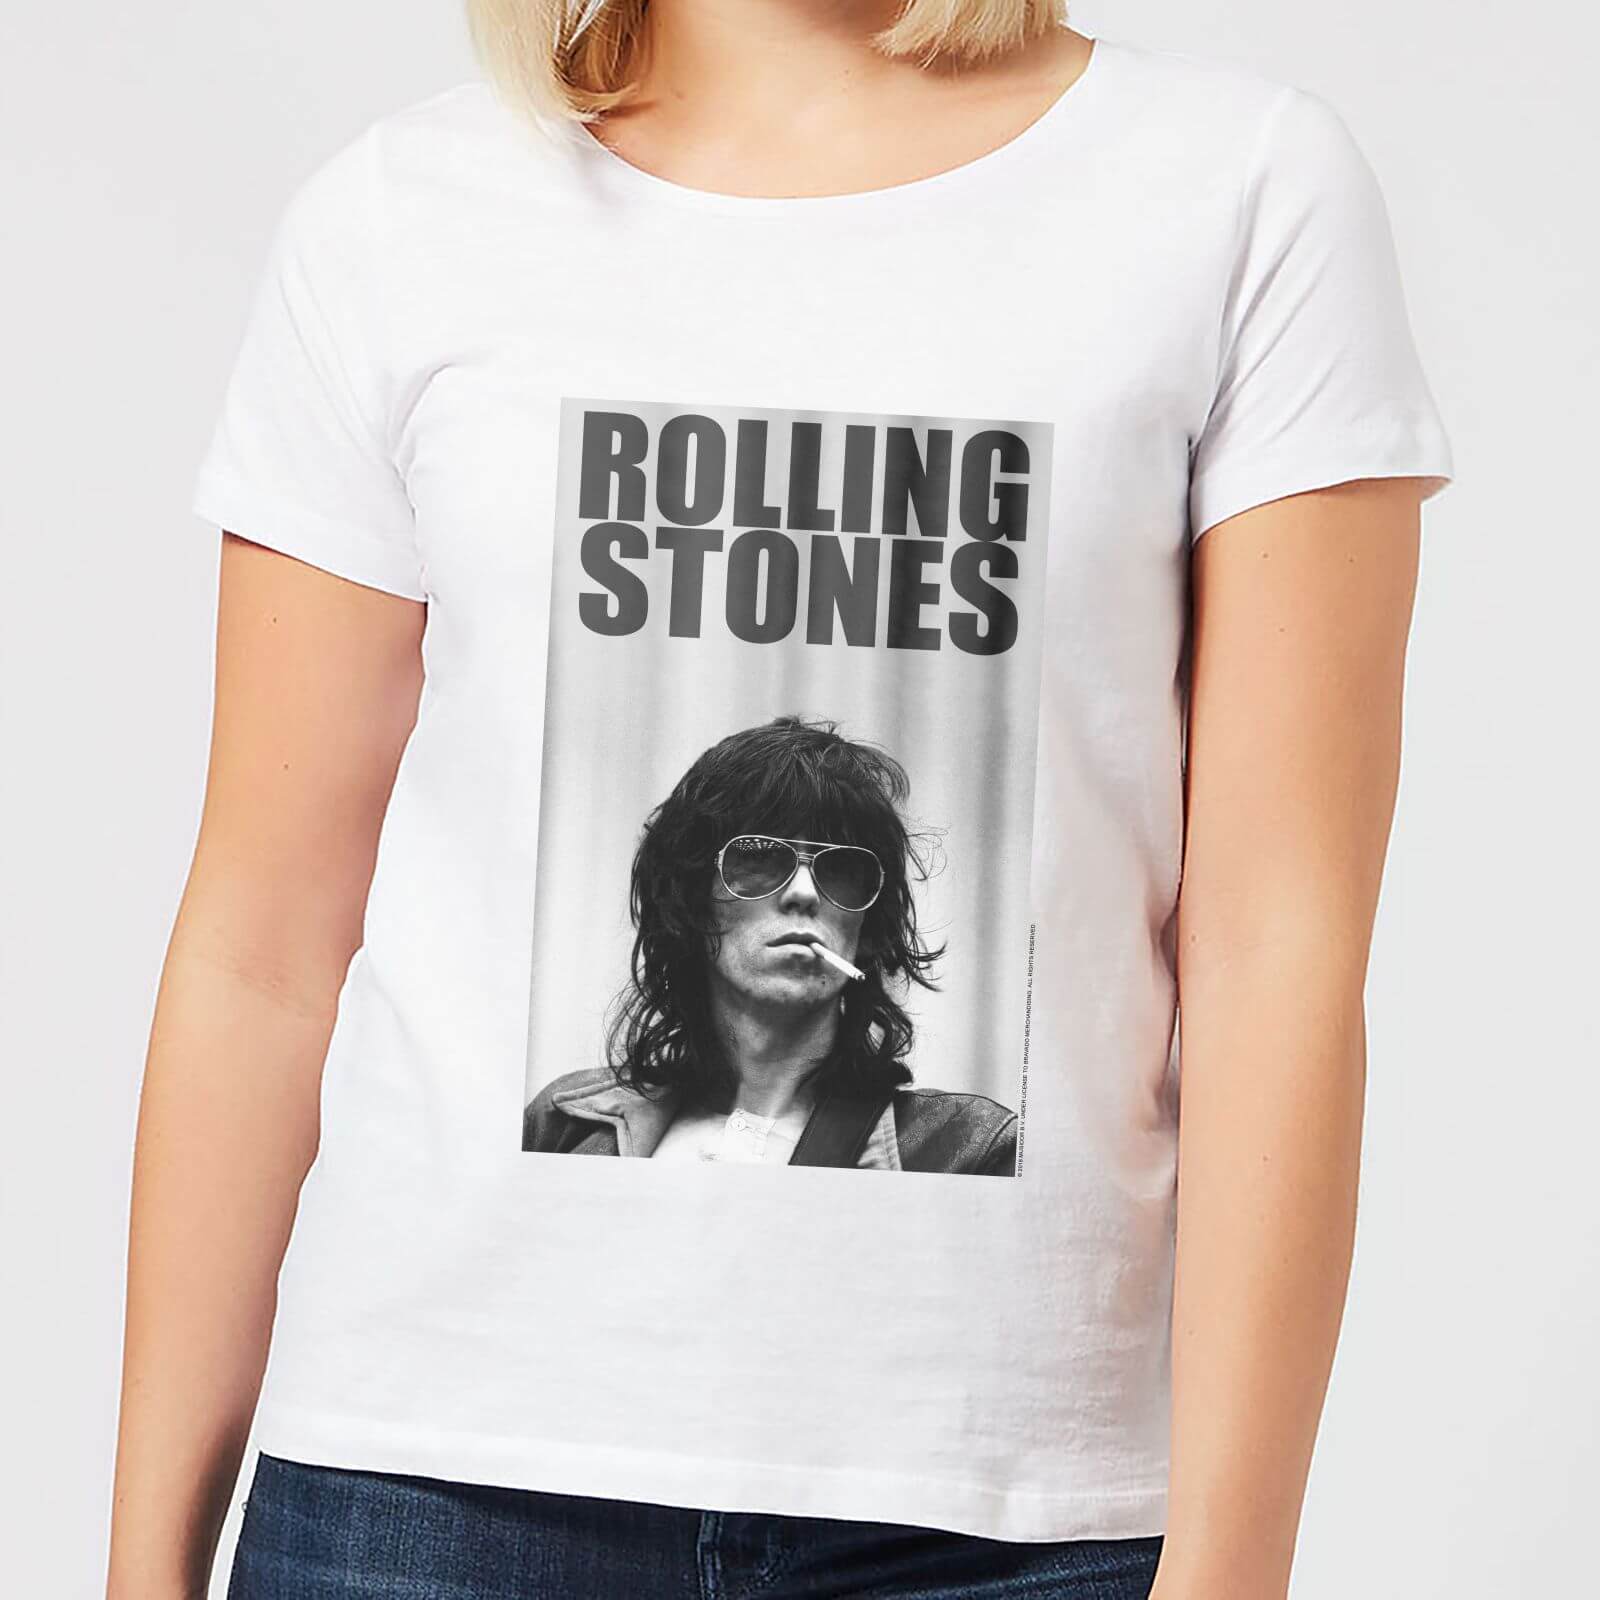 Rolling Stones T Shirt White : Madeworn Cotton Rolling Stones Sequin ...